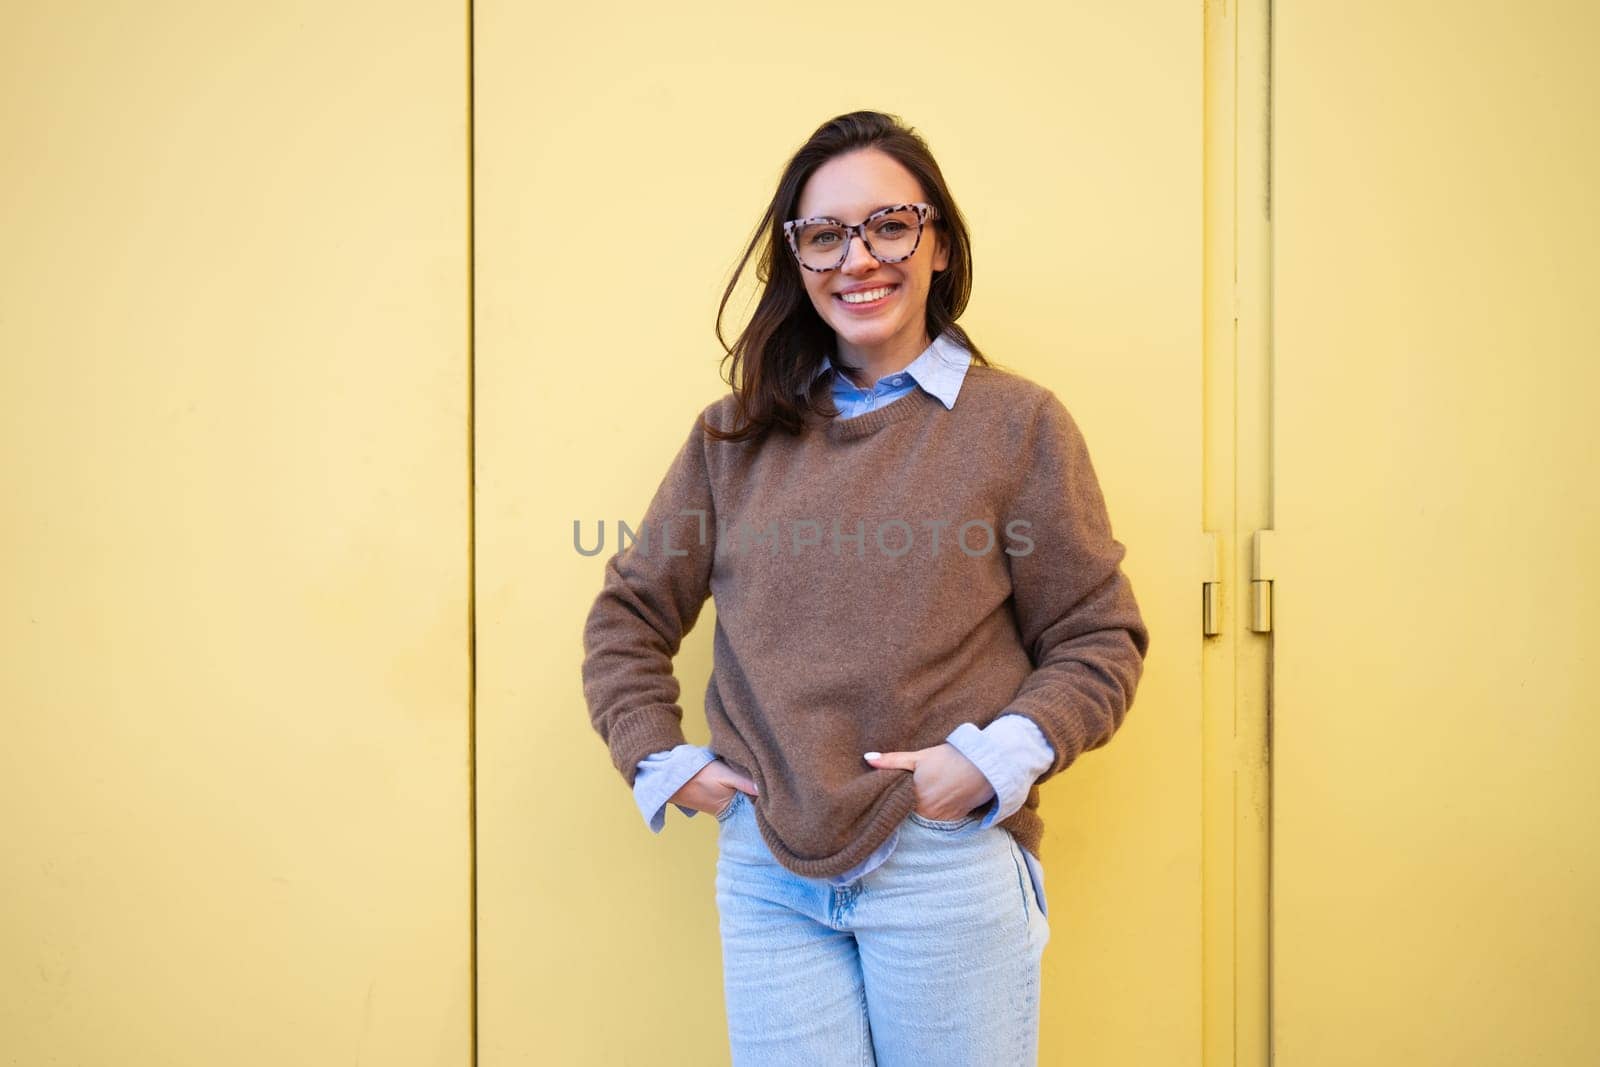 Happy woman in glasses outdoor on yellow color background. Positive people concept. Smiling girl looking at camera, hands in pocket, dressed sweater and jeans